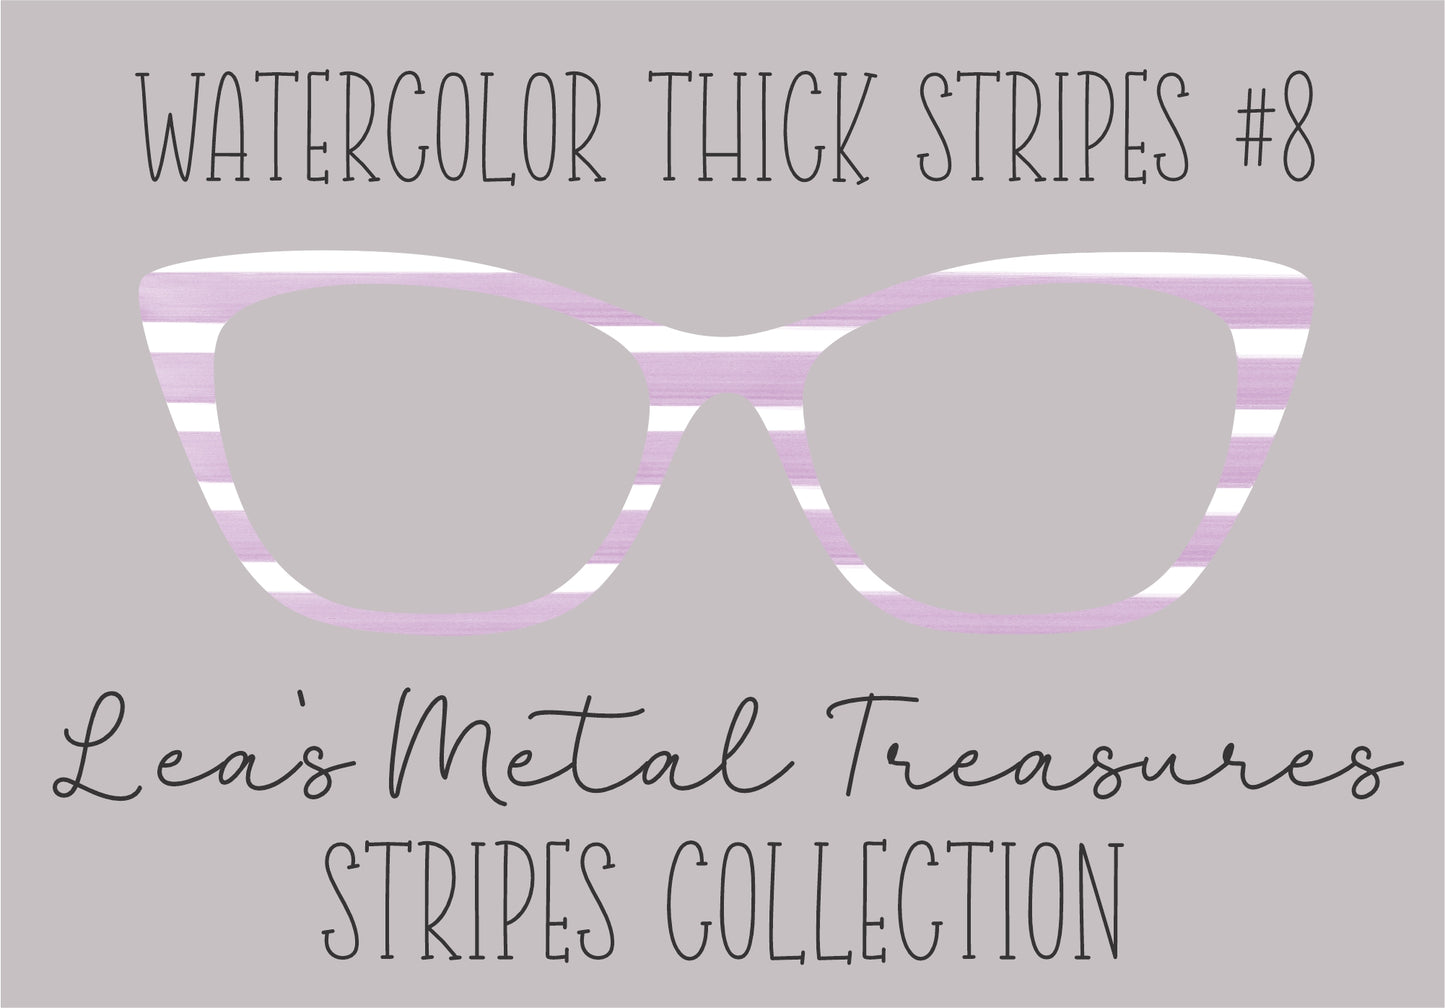 WATERCOLOR THICK STRIPES #8 Eyewear Frame Toppers COMES WITH MAGNETS